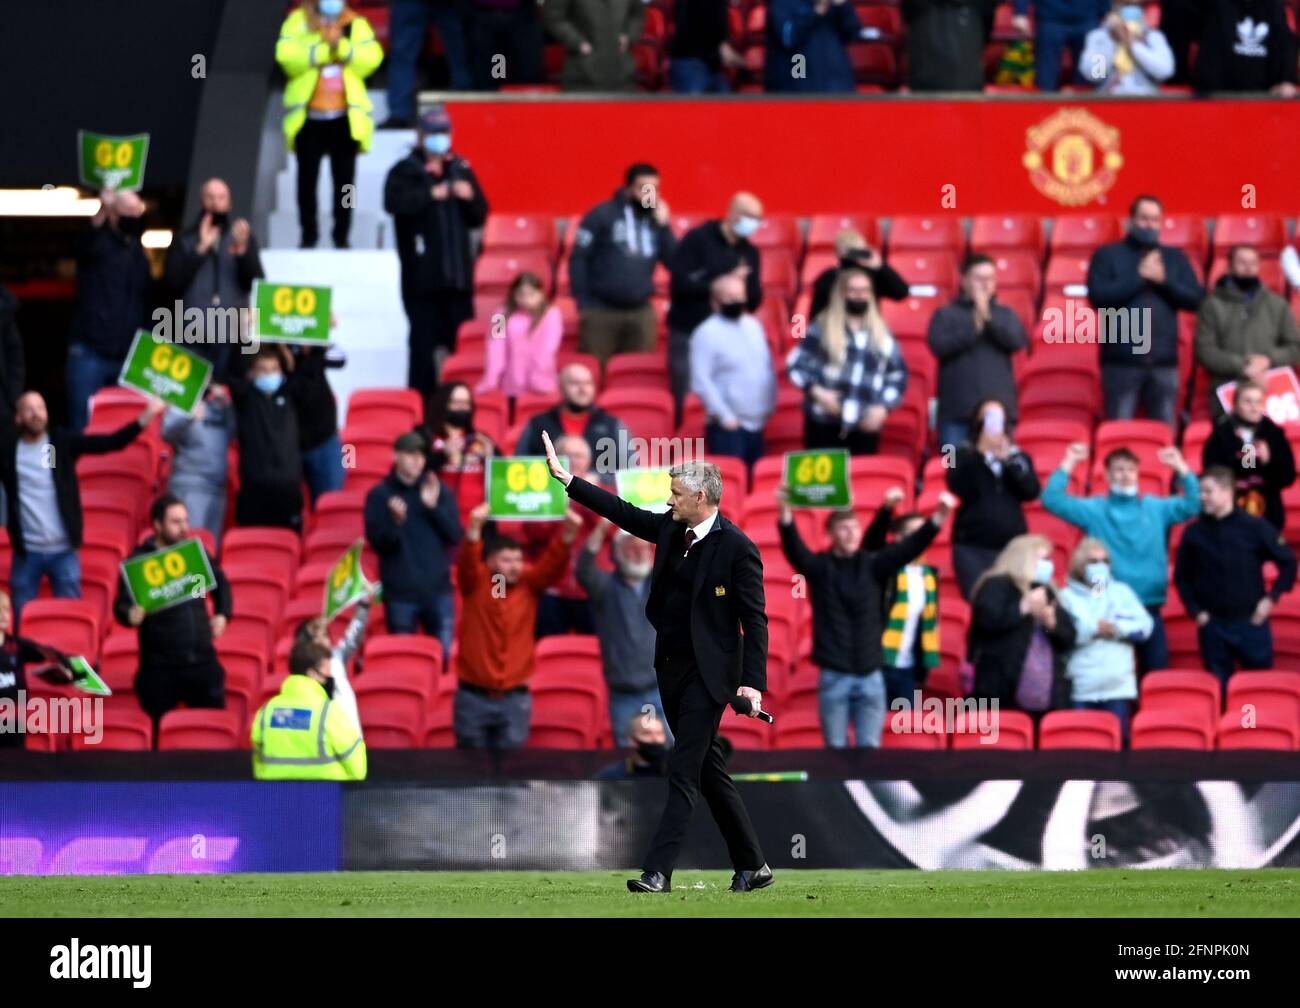 Manchester United manager Ole Gunnar Solskjaer gestures to the fan after the Premier League match at Old Trafford, Manchester. Picture date: Tuesday May 18, 2021. Stock Photo